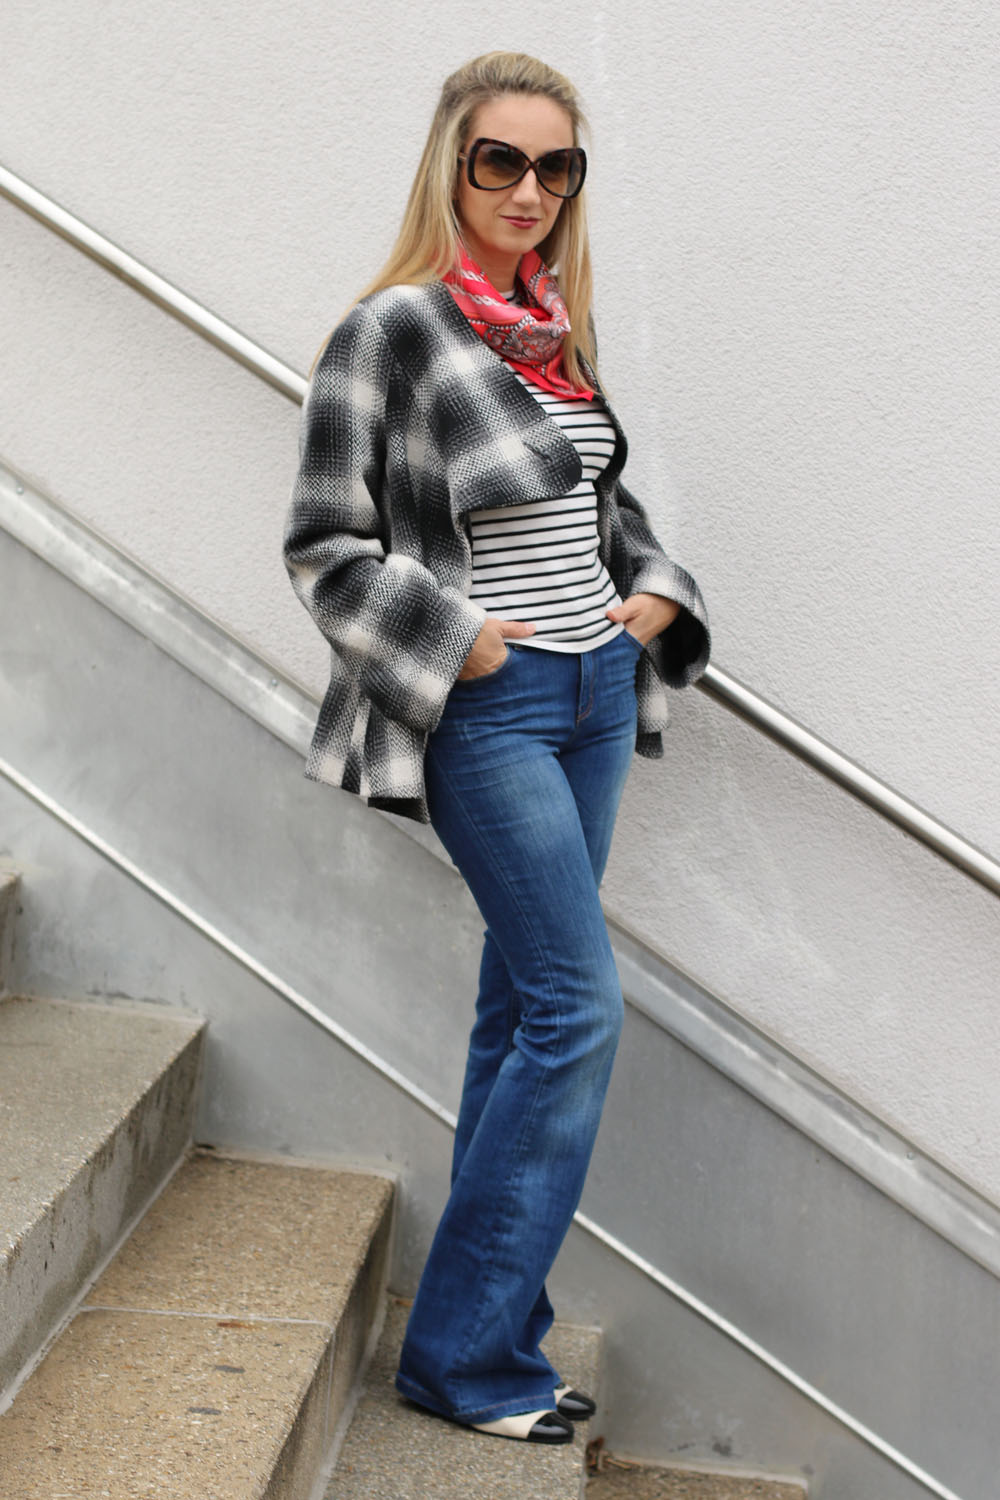 colourclub-schlaghose-trend-flared-jeans-marry-jane-pumps-stripes-shirt6